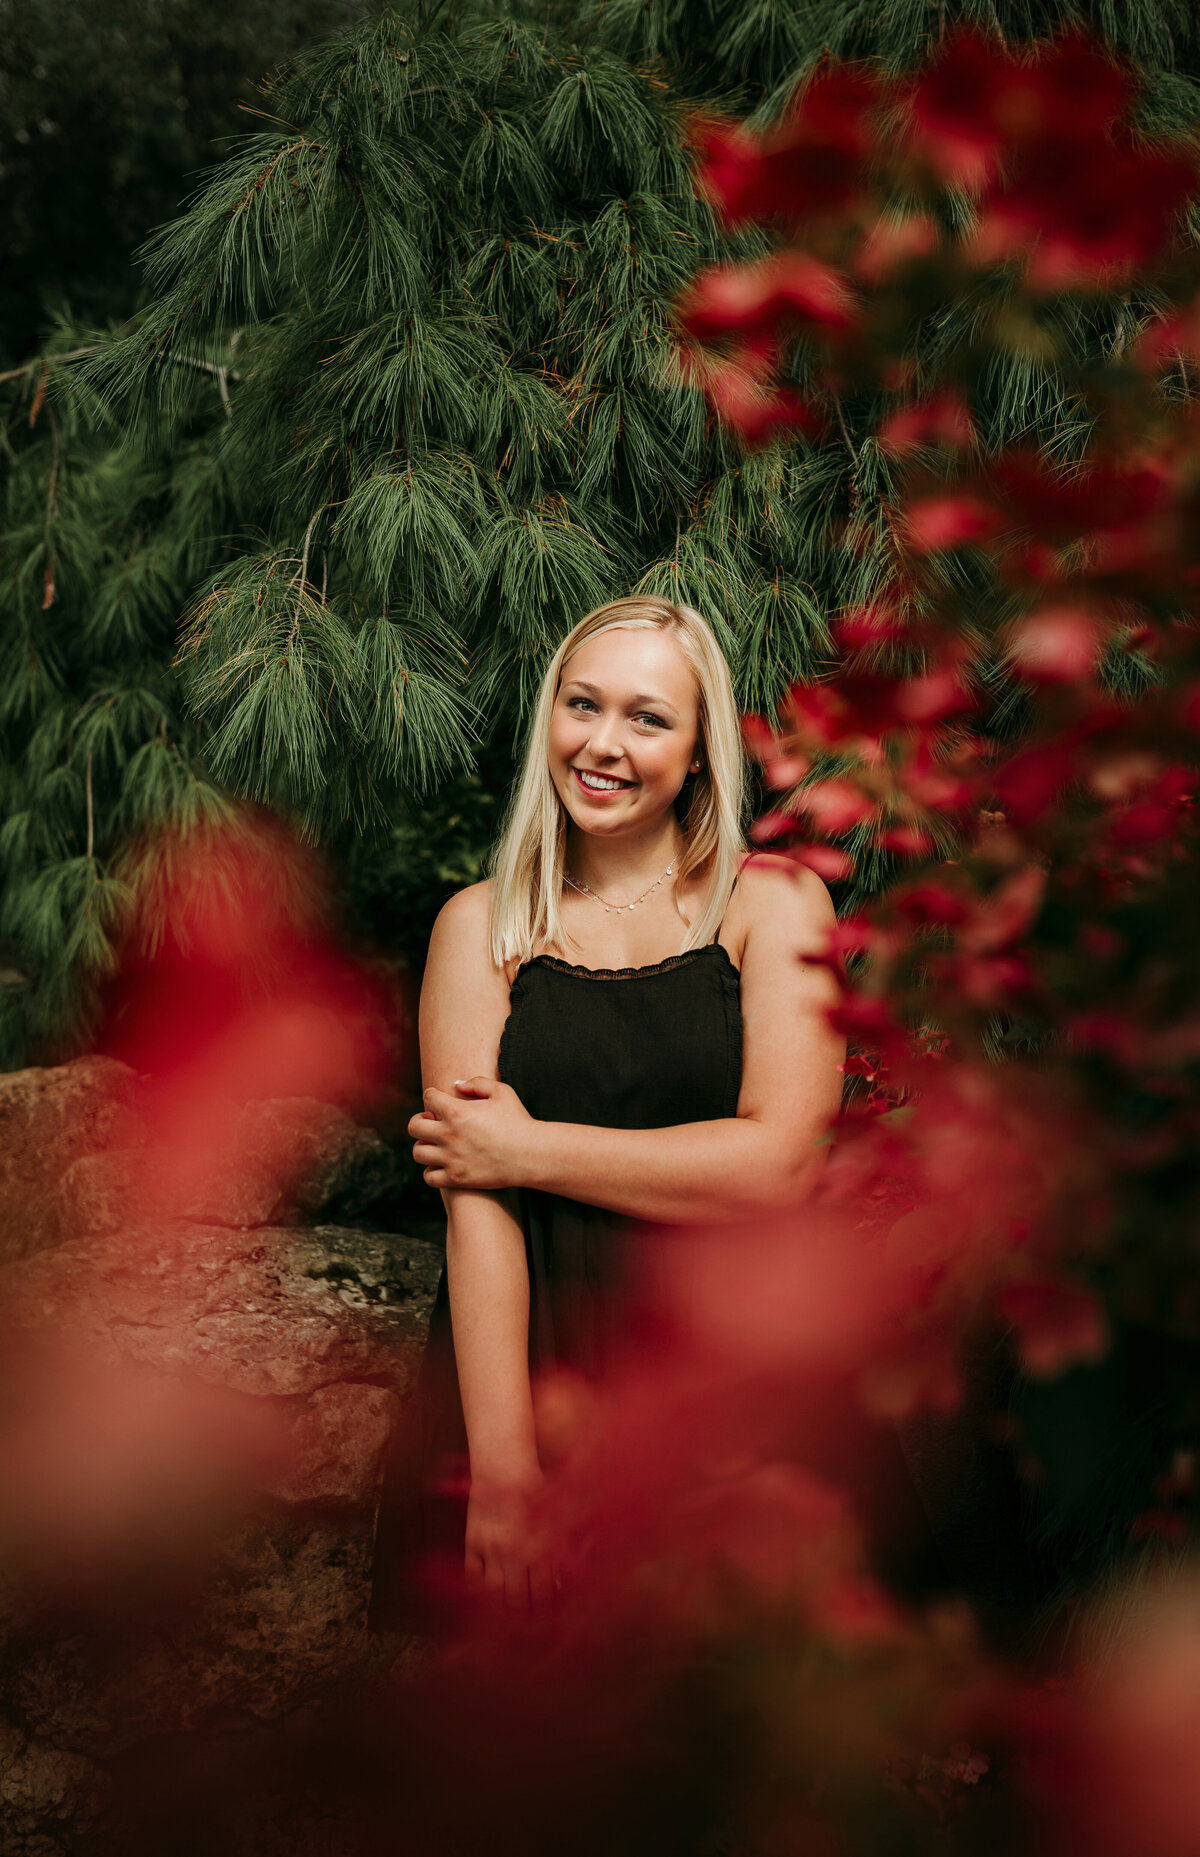 Immerse yourself in meadow moments with senior portraits amidst wildflower bliss. Shannon Kathleen Photography crafts portraits that echo the charm of nature's vibrant tapestry. Reserve your spot.